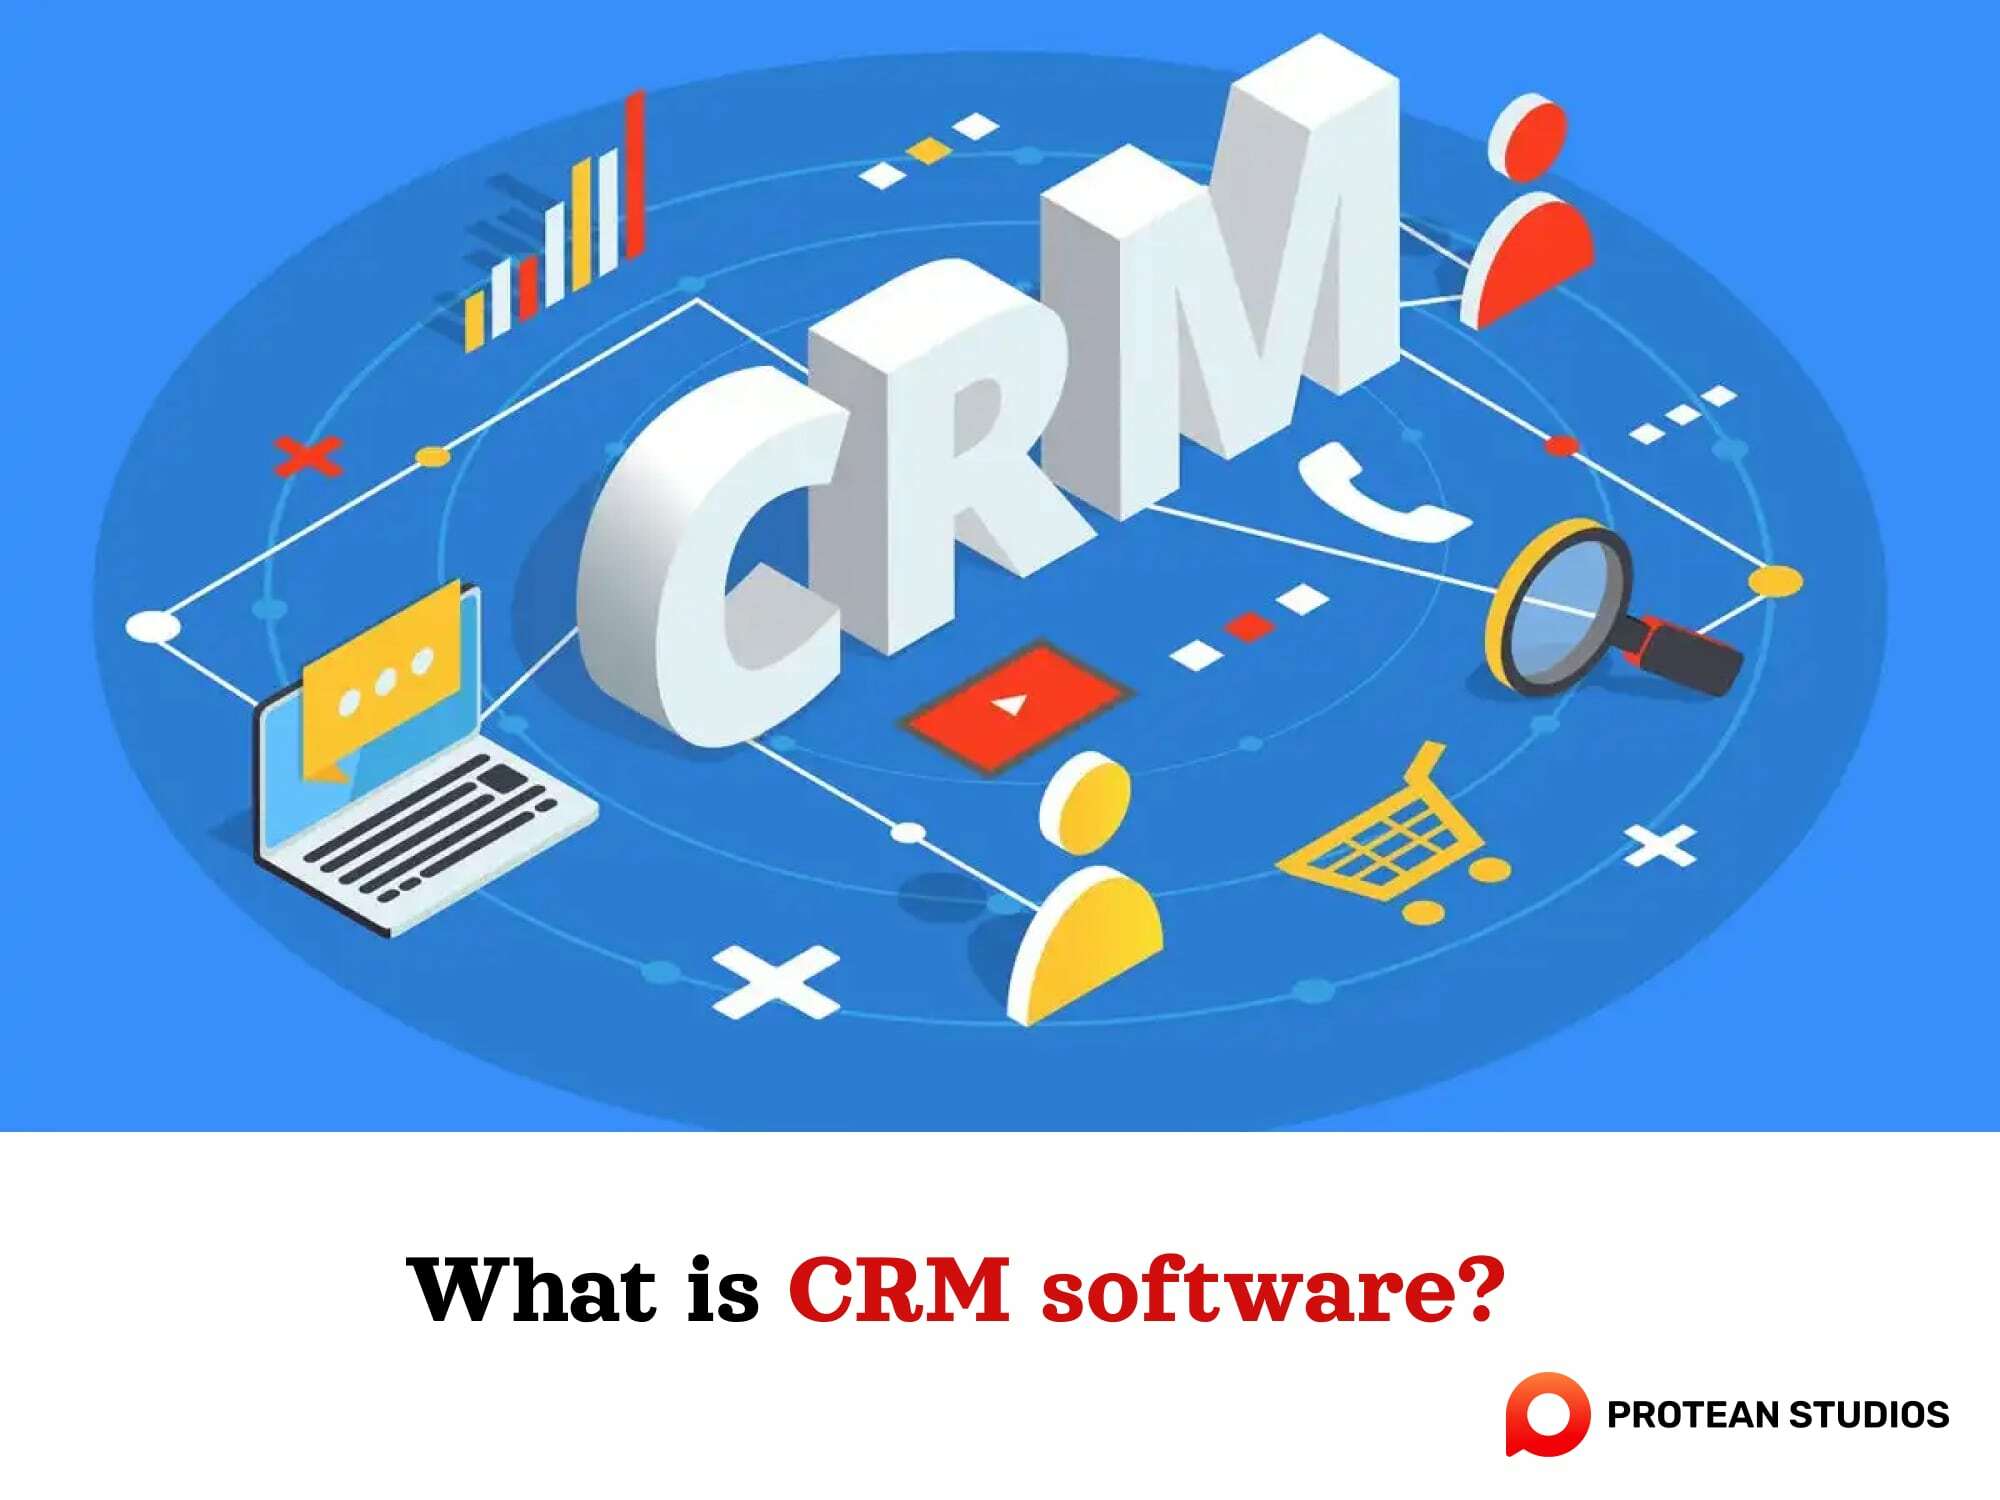 CRM software and its features